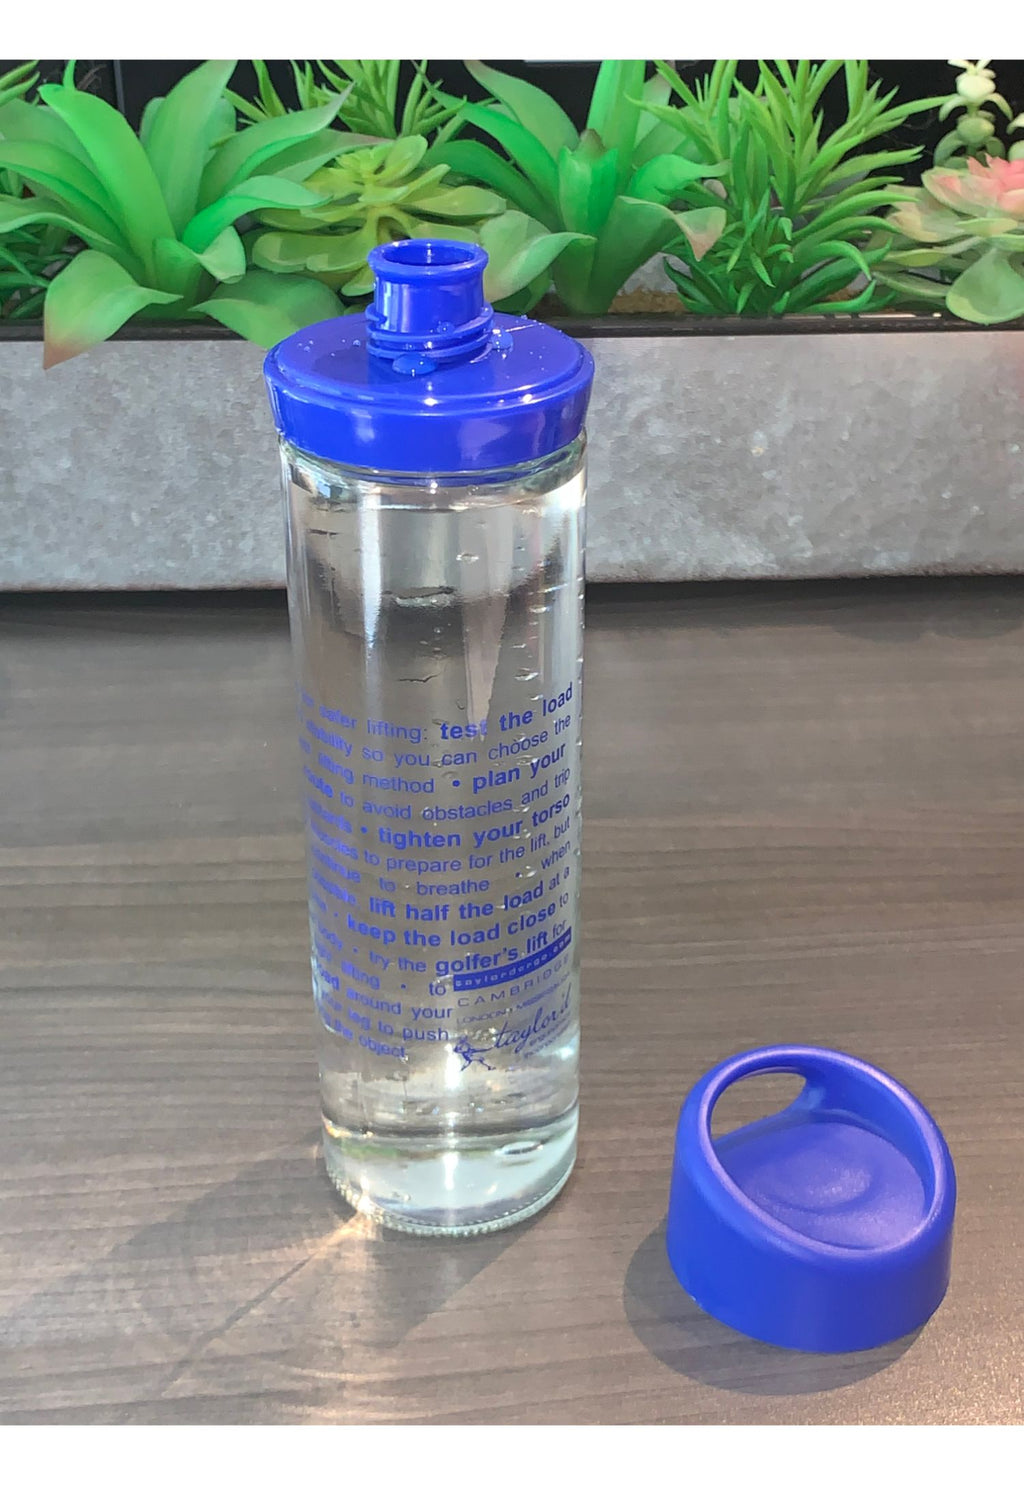 photograph of glass water bottle with blue lid and spout, showing ergonomics lifting tips imprint